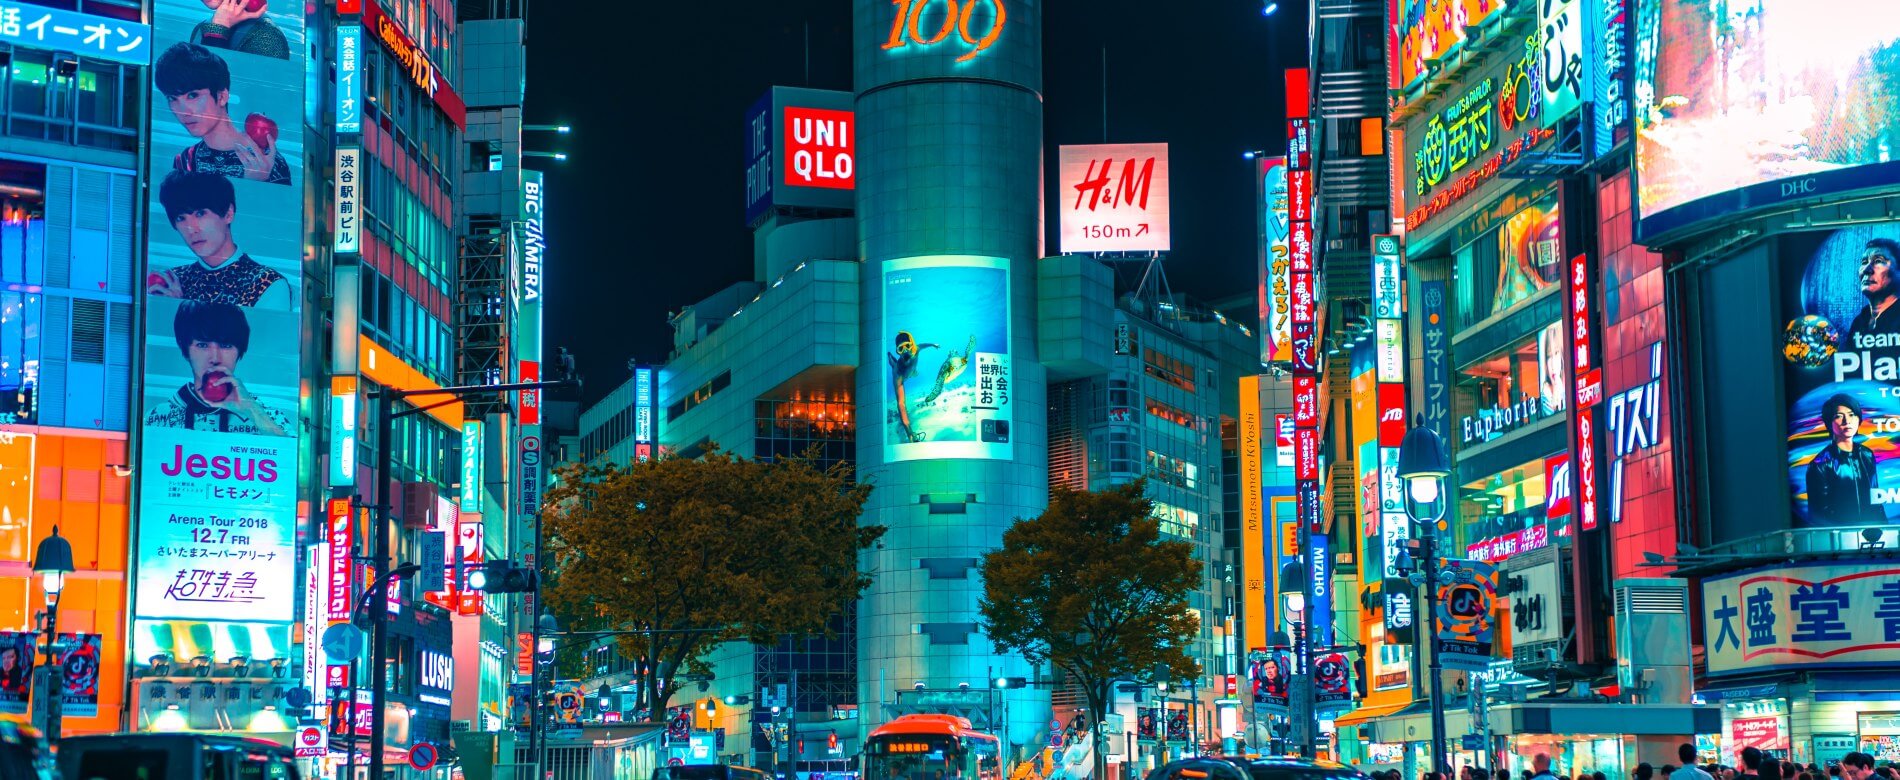 ontsmettingsmiddel seinpaal Blaast op Traditional media still dominate the Japanese market but new communication  channels are catching up (Global PR Perspectives) | GlobalCom PR Network